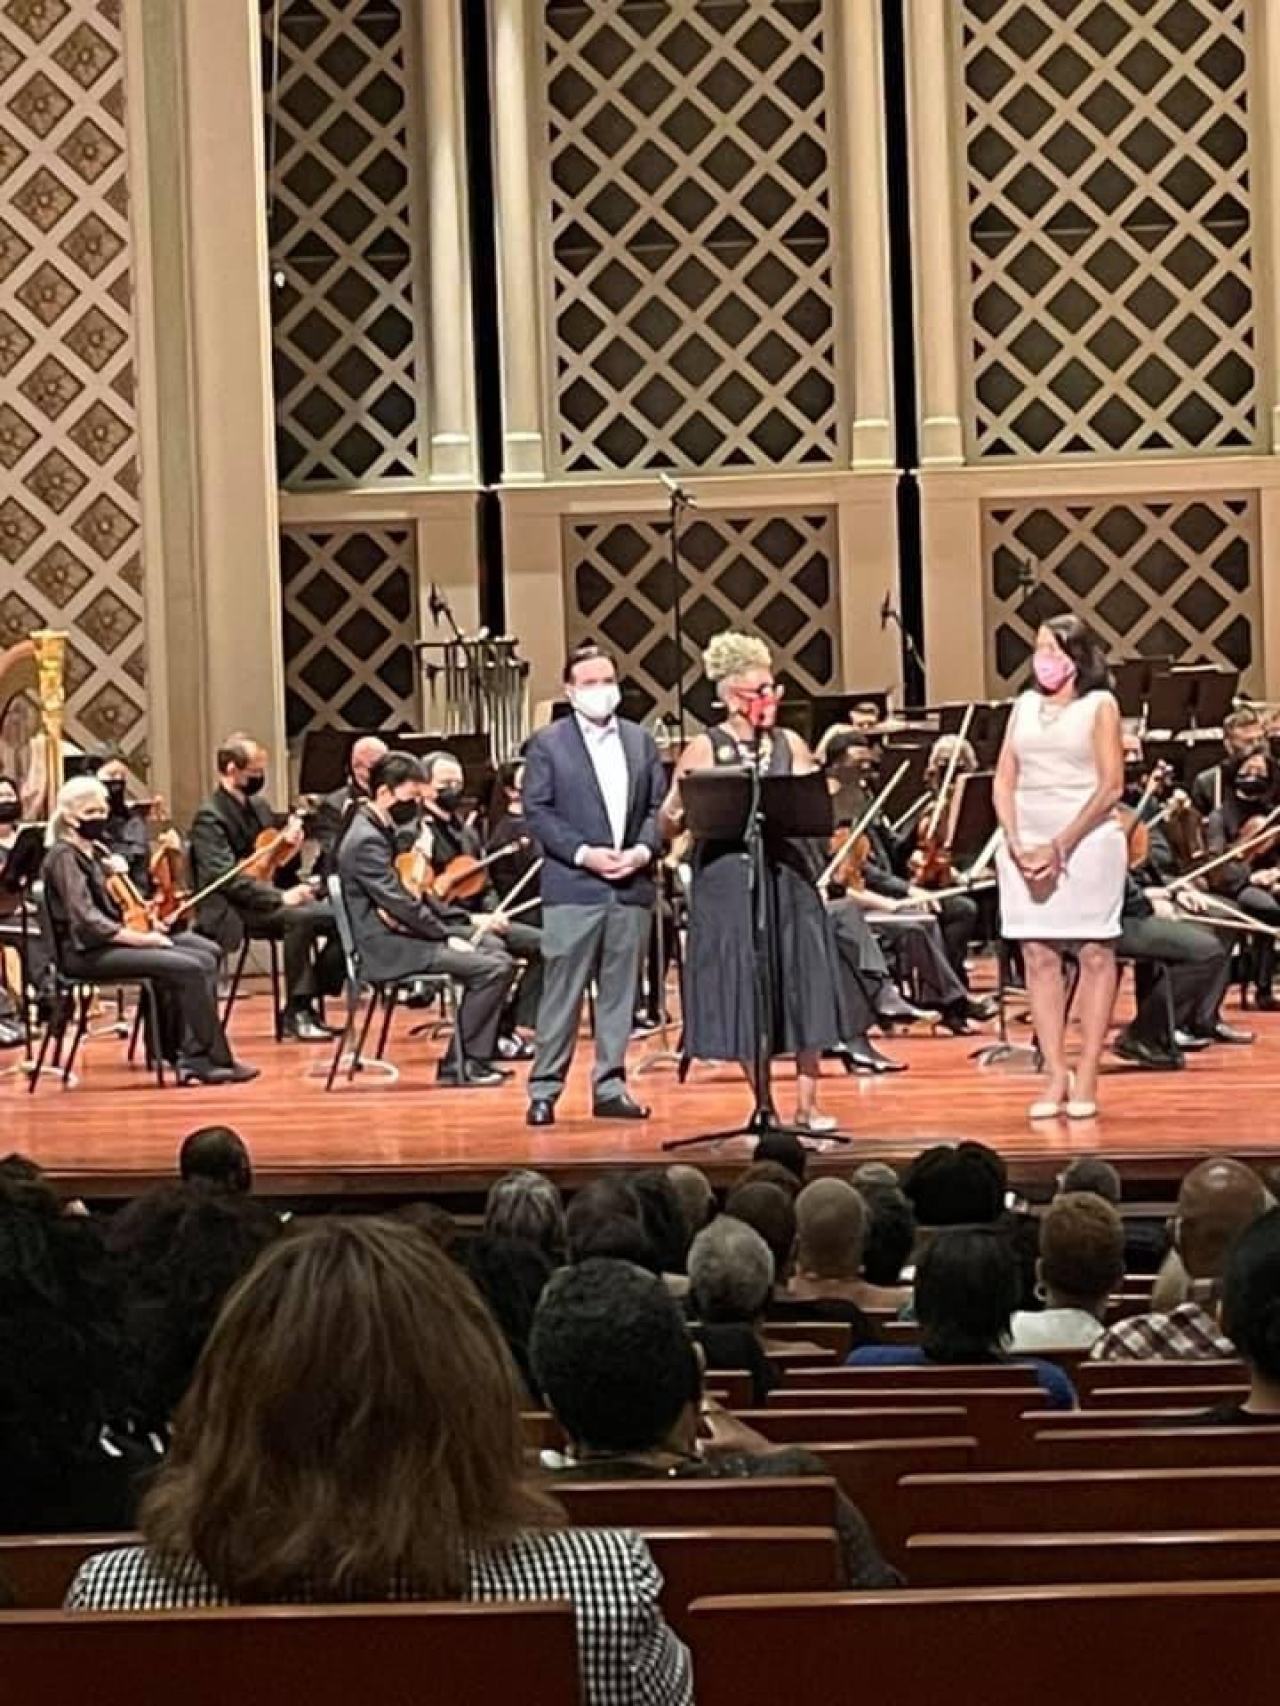 Rep. Ingram presents a commendation on stage at the Cincinnati Symphony Orchestra: 20 Anniversary Classical Roots Concert